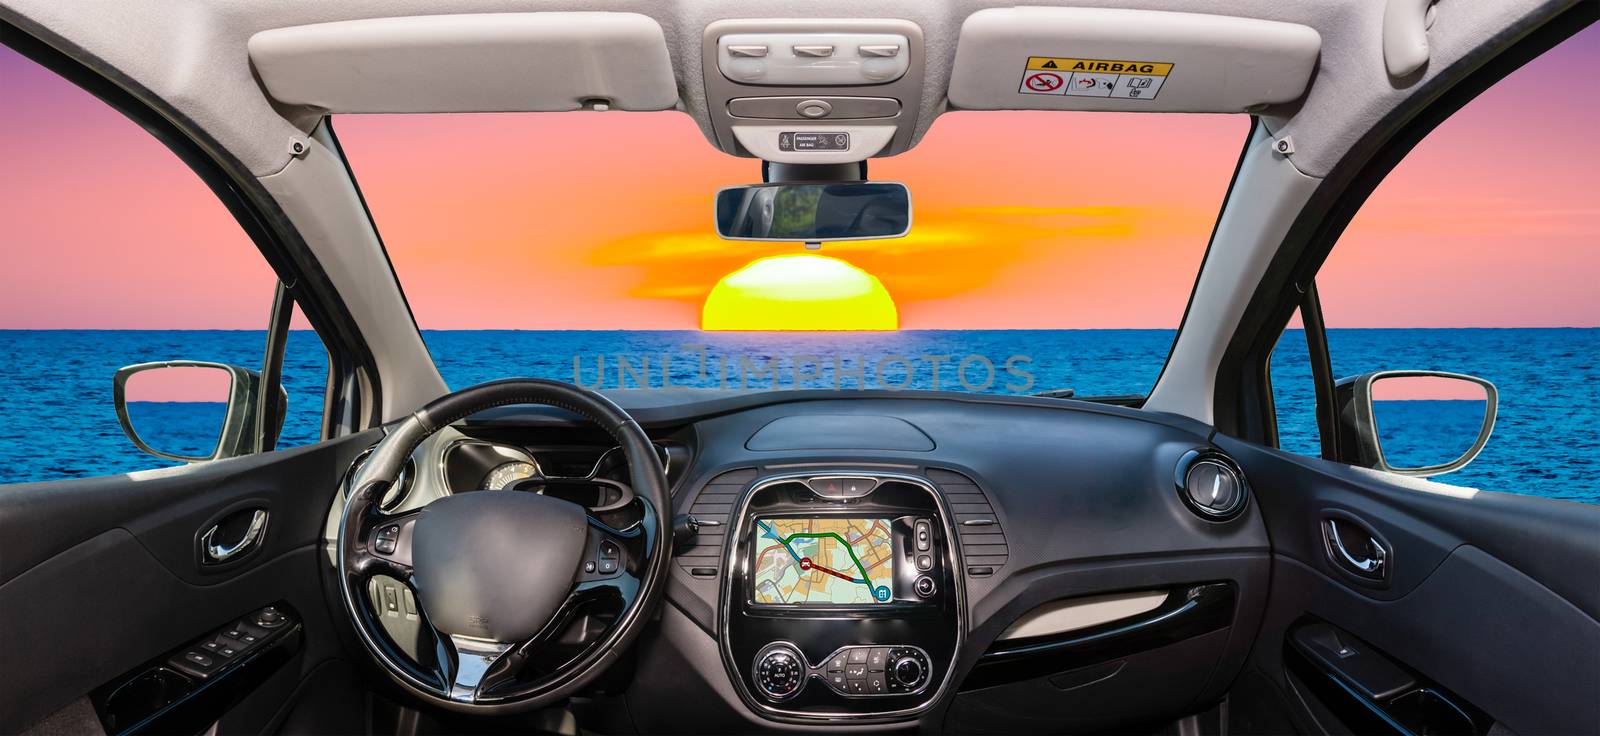 Looking through a car windshield with view of a beautiful sunset by the mediterranean sea, Italy